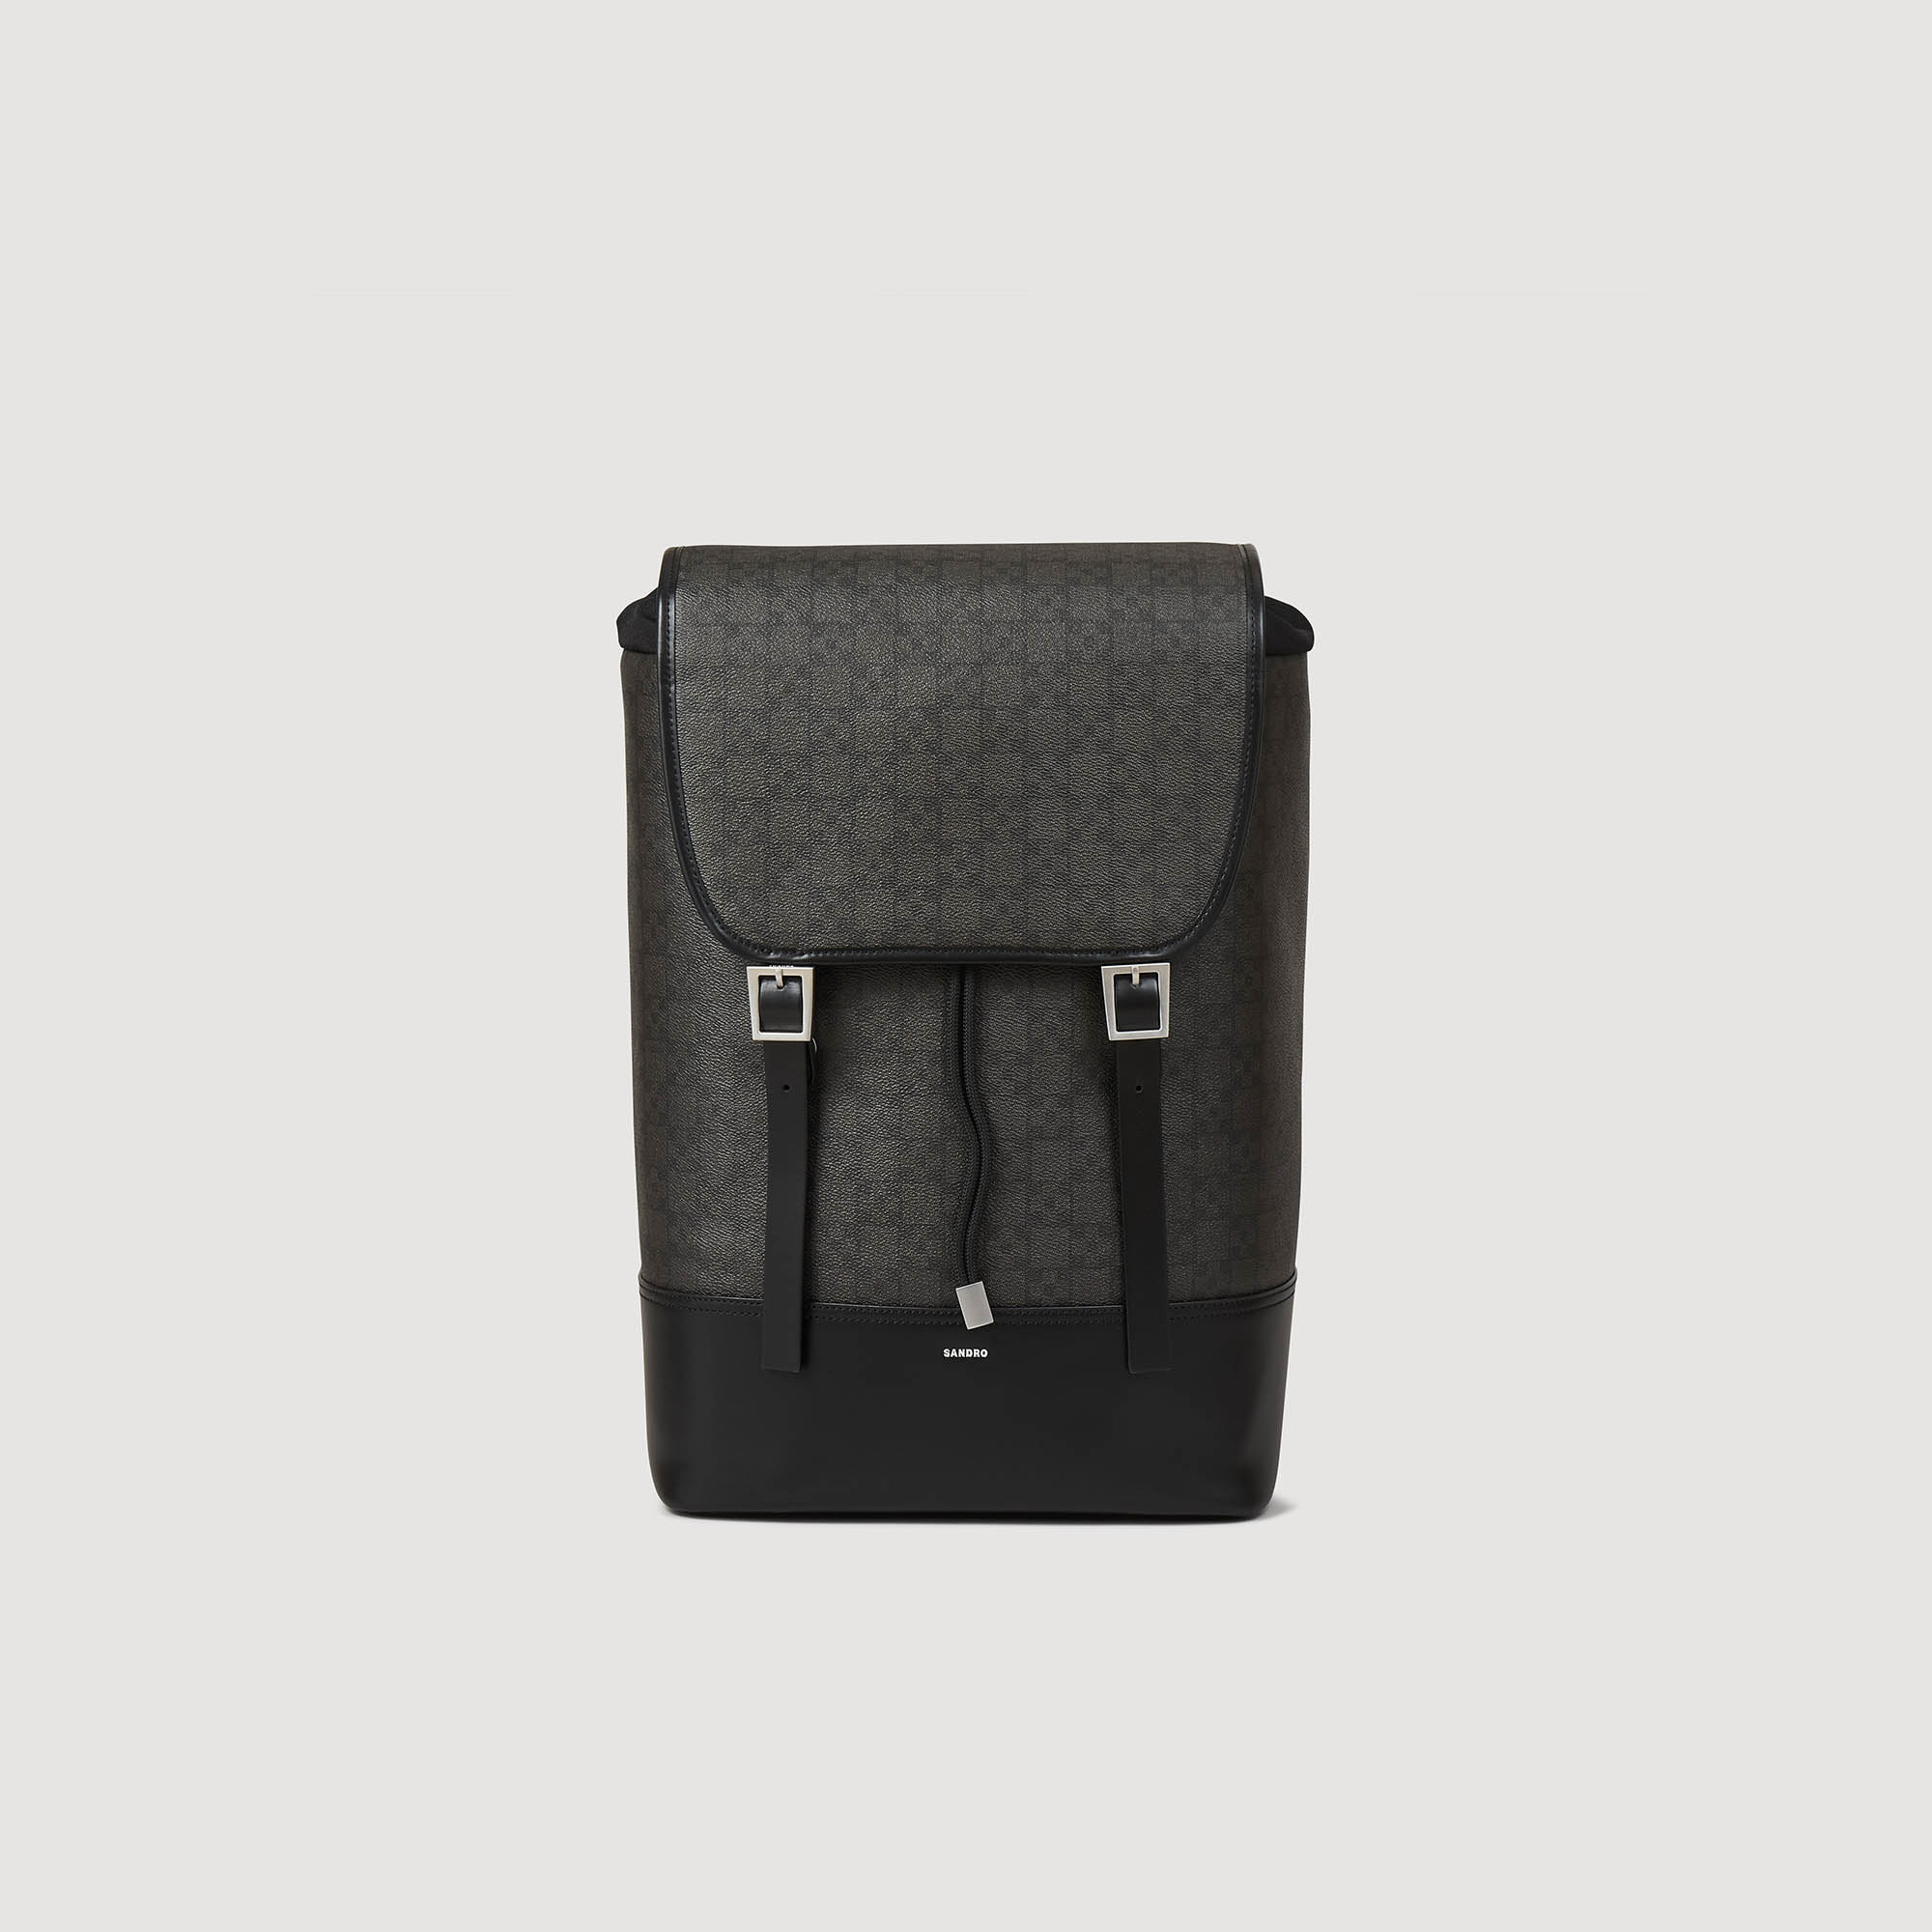 Sandro polyester Lining: Backpack in grained coated canvas embellished with a Square Cross pattern, leather details, and an embossed Sandro logo in silver print, featuring a flap with adjustable buckles, a leather-covered handle, internal storage pockets, and padded shoulder straps with metal stoppers